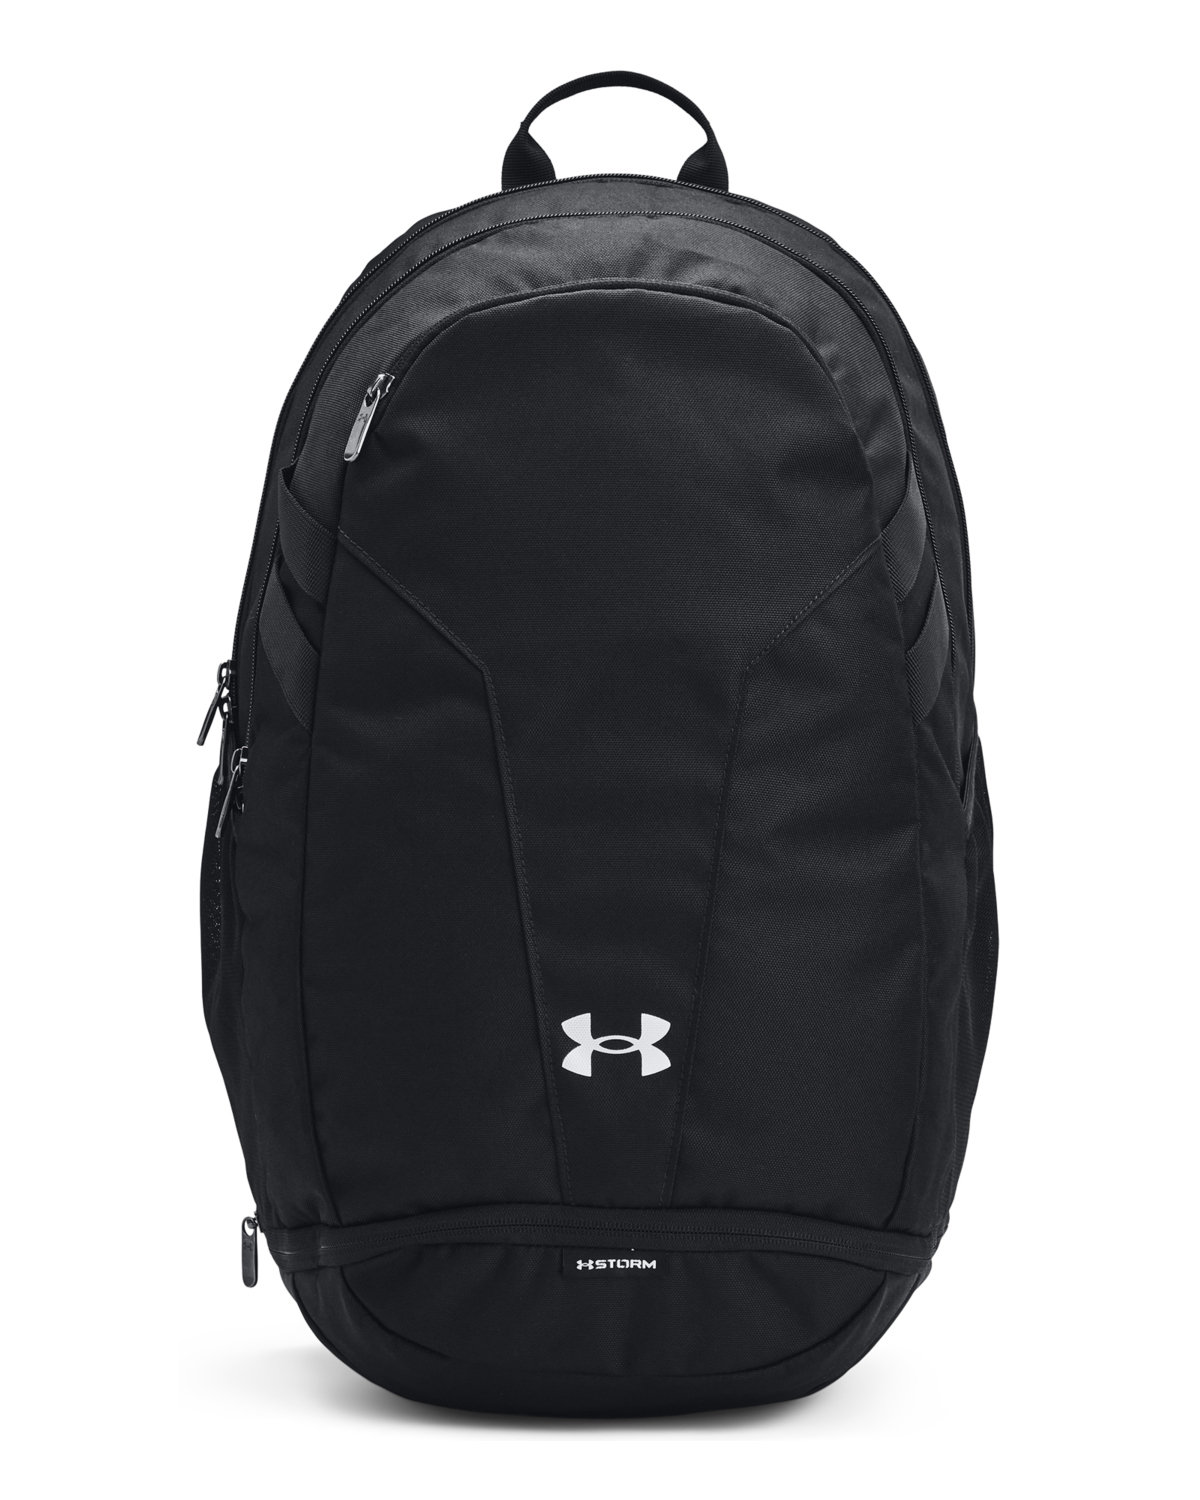 Under Armour Team Hustle Backpack- White & Grey